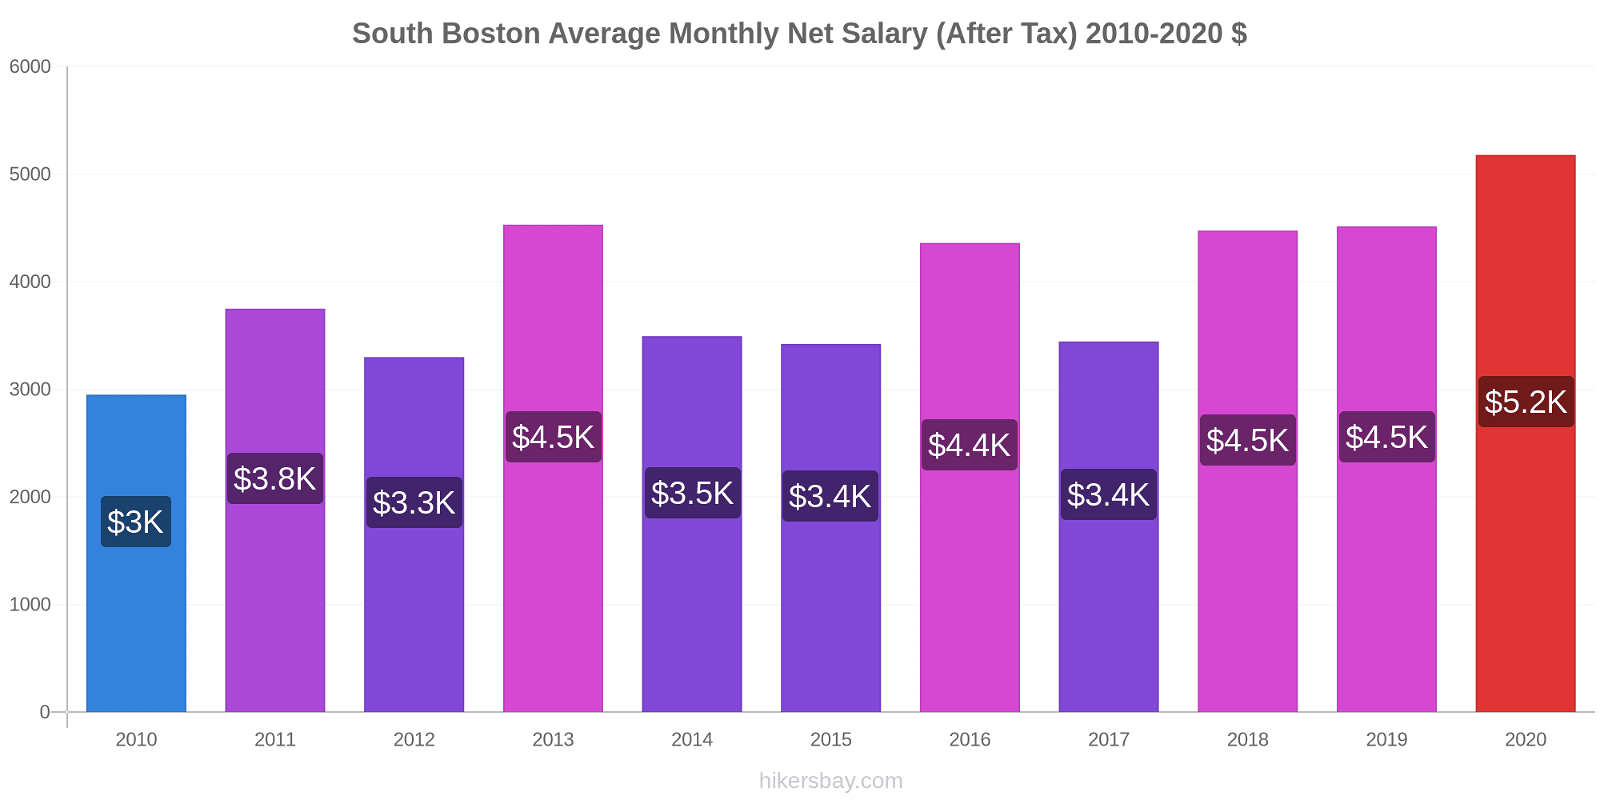 South Boston price changes Average Monthly Net Salary (After Tax) hikersbay.com